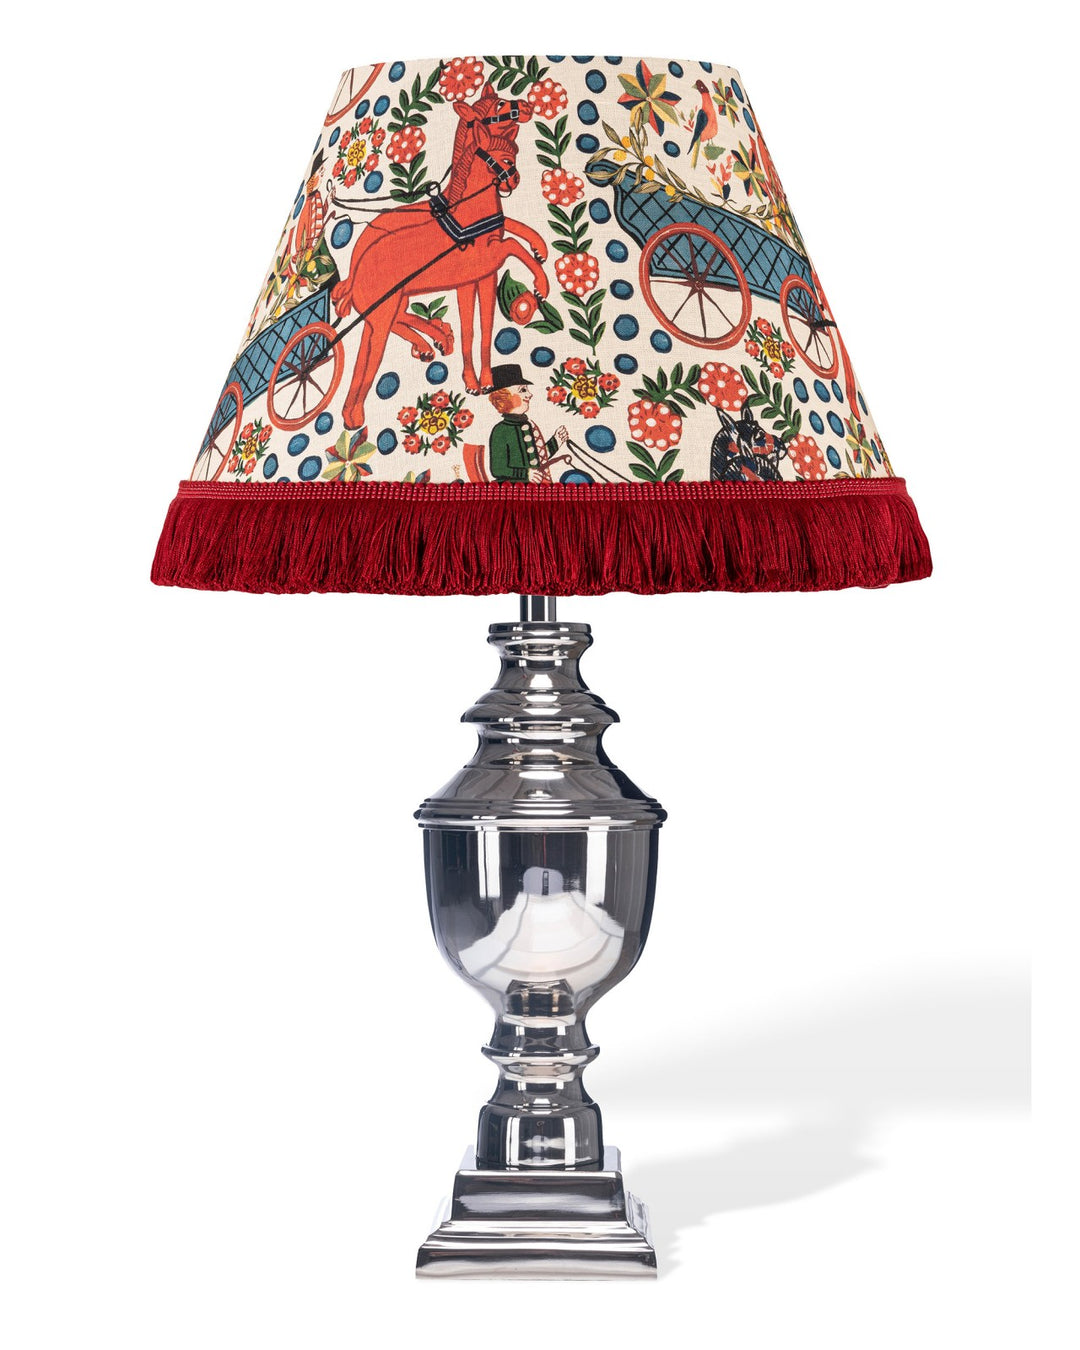 mind-the-gap-Tyrol-collection-Fasnacht-lampshade-fringed-linen-pattern-folk-design-cone-shade-carnival-alpine-apres-ski-collection